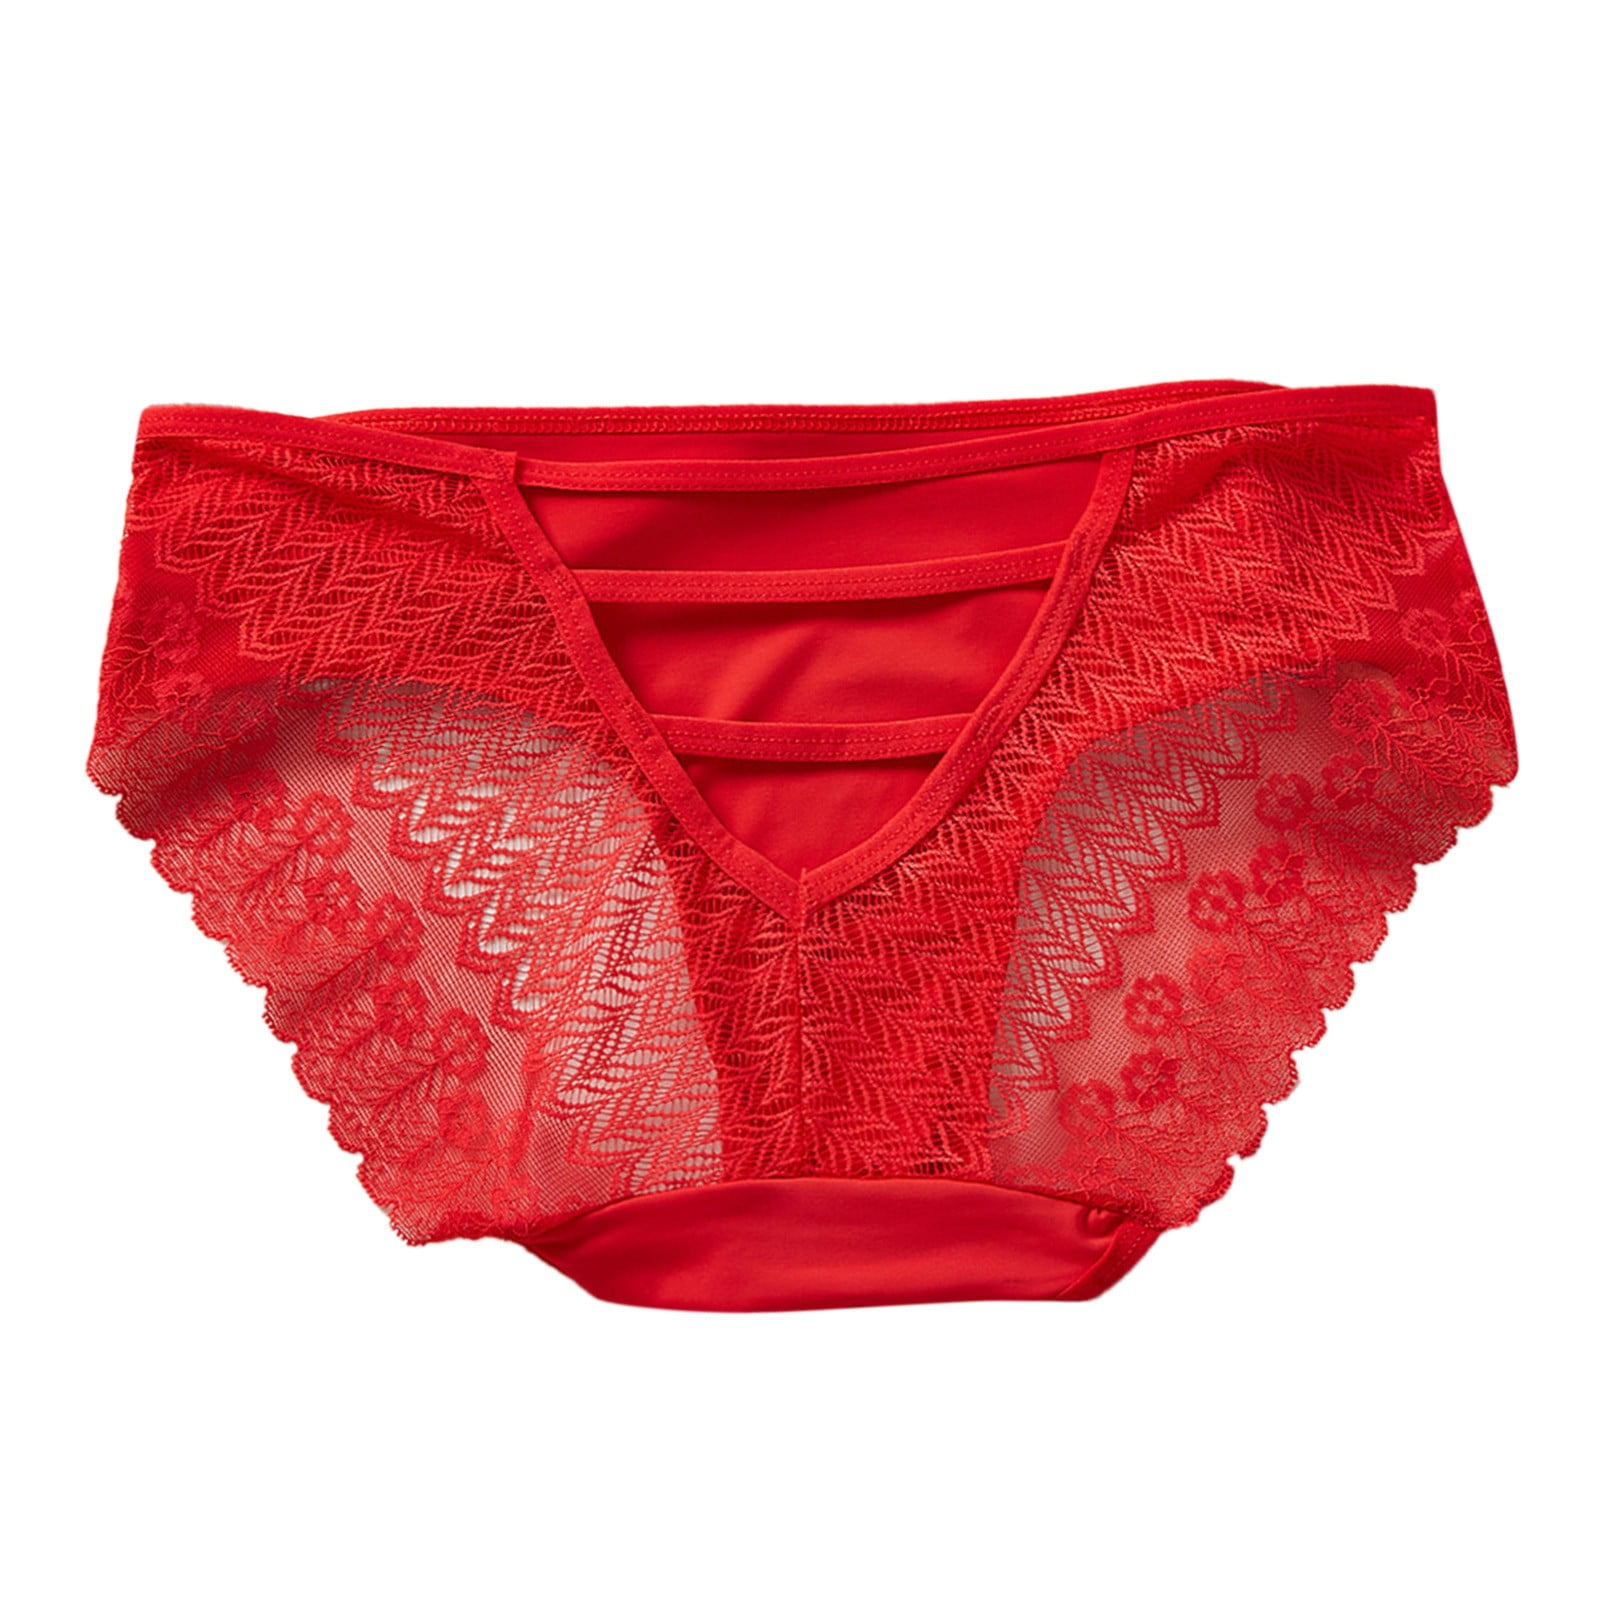 Women Panties Lingerie Womens Red Lace Breathable Lace Hollow Out And Raise  The Pure Brief Panties 